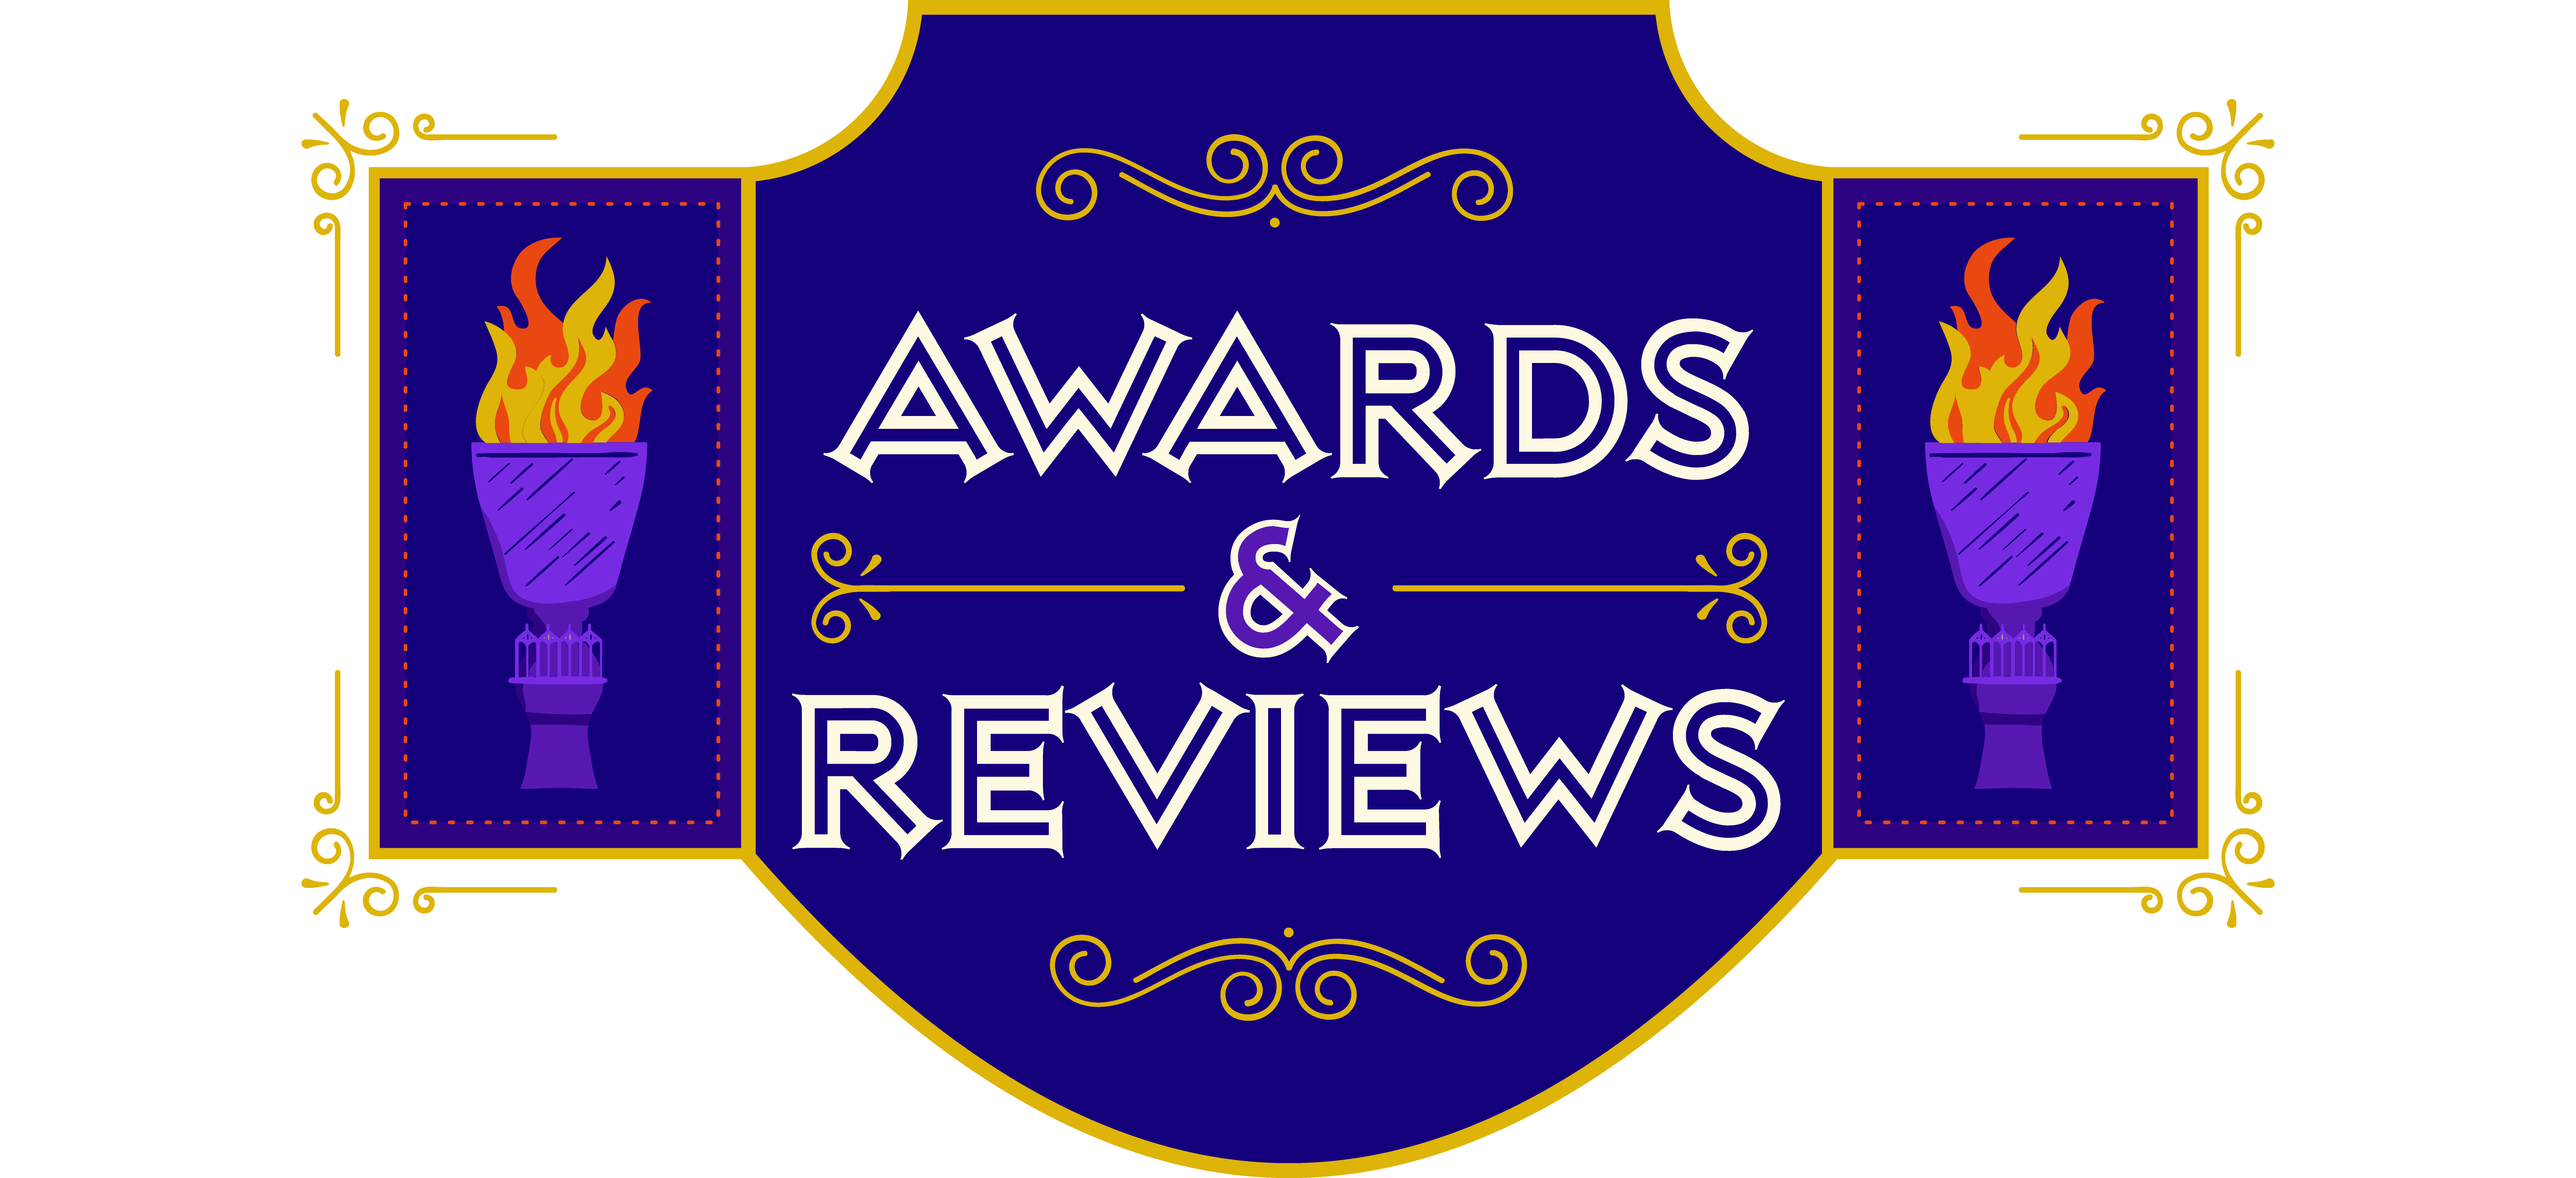 Awards and Reviews header illustration with the Goblet of Fire and golden Snitch